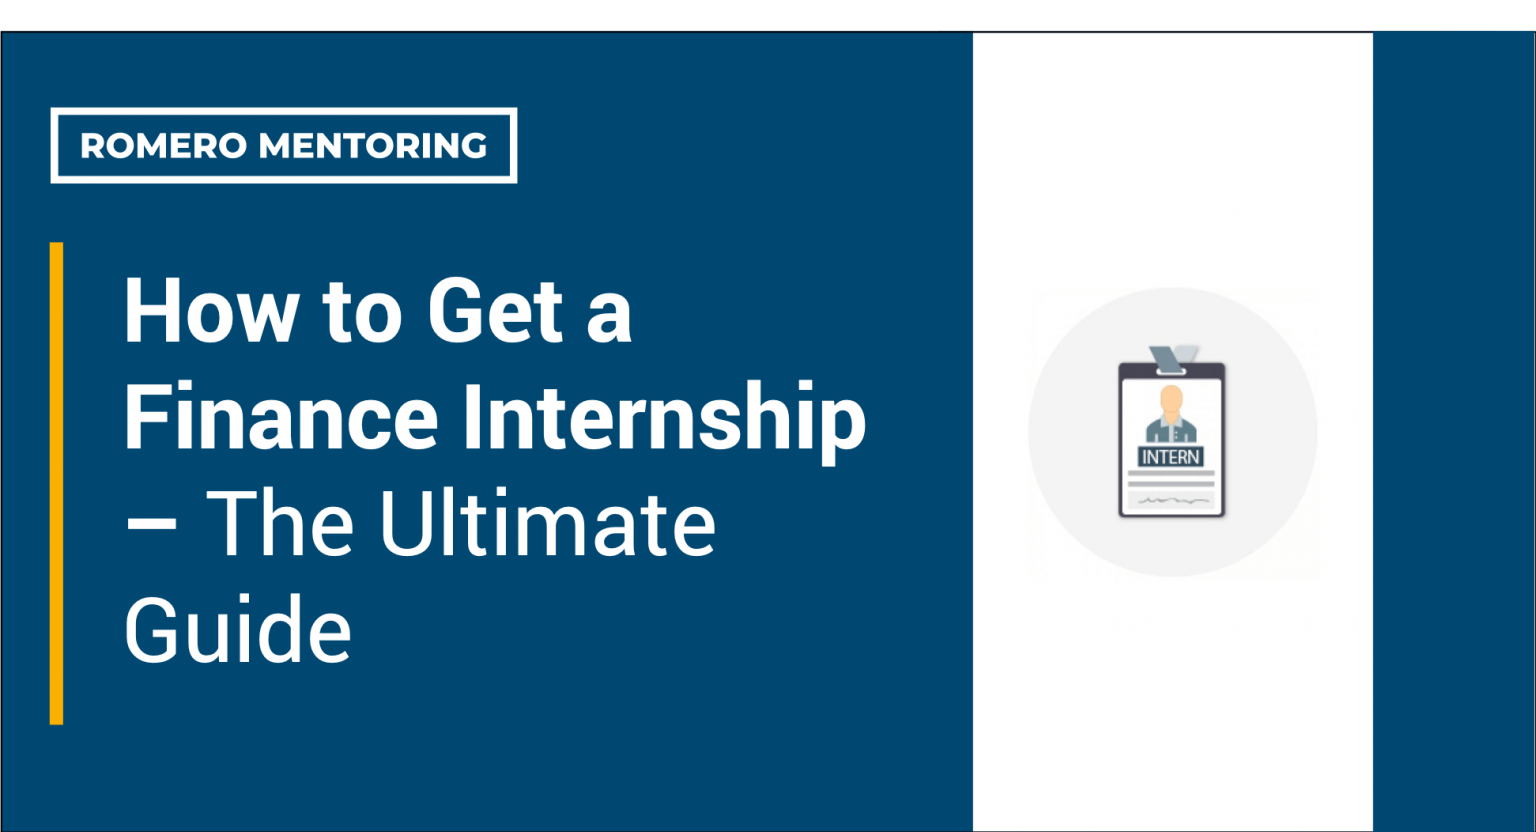 How to Get a Finance Internship 2020 Ultimate Guide